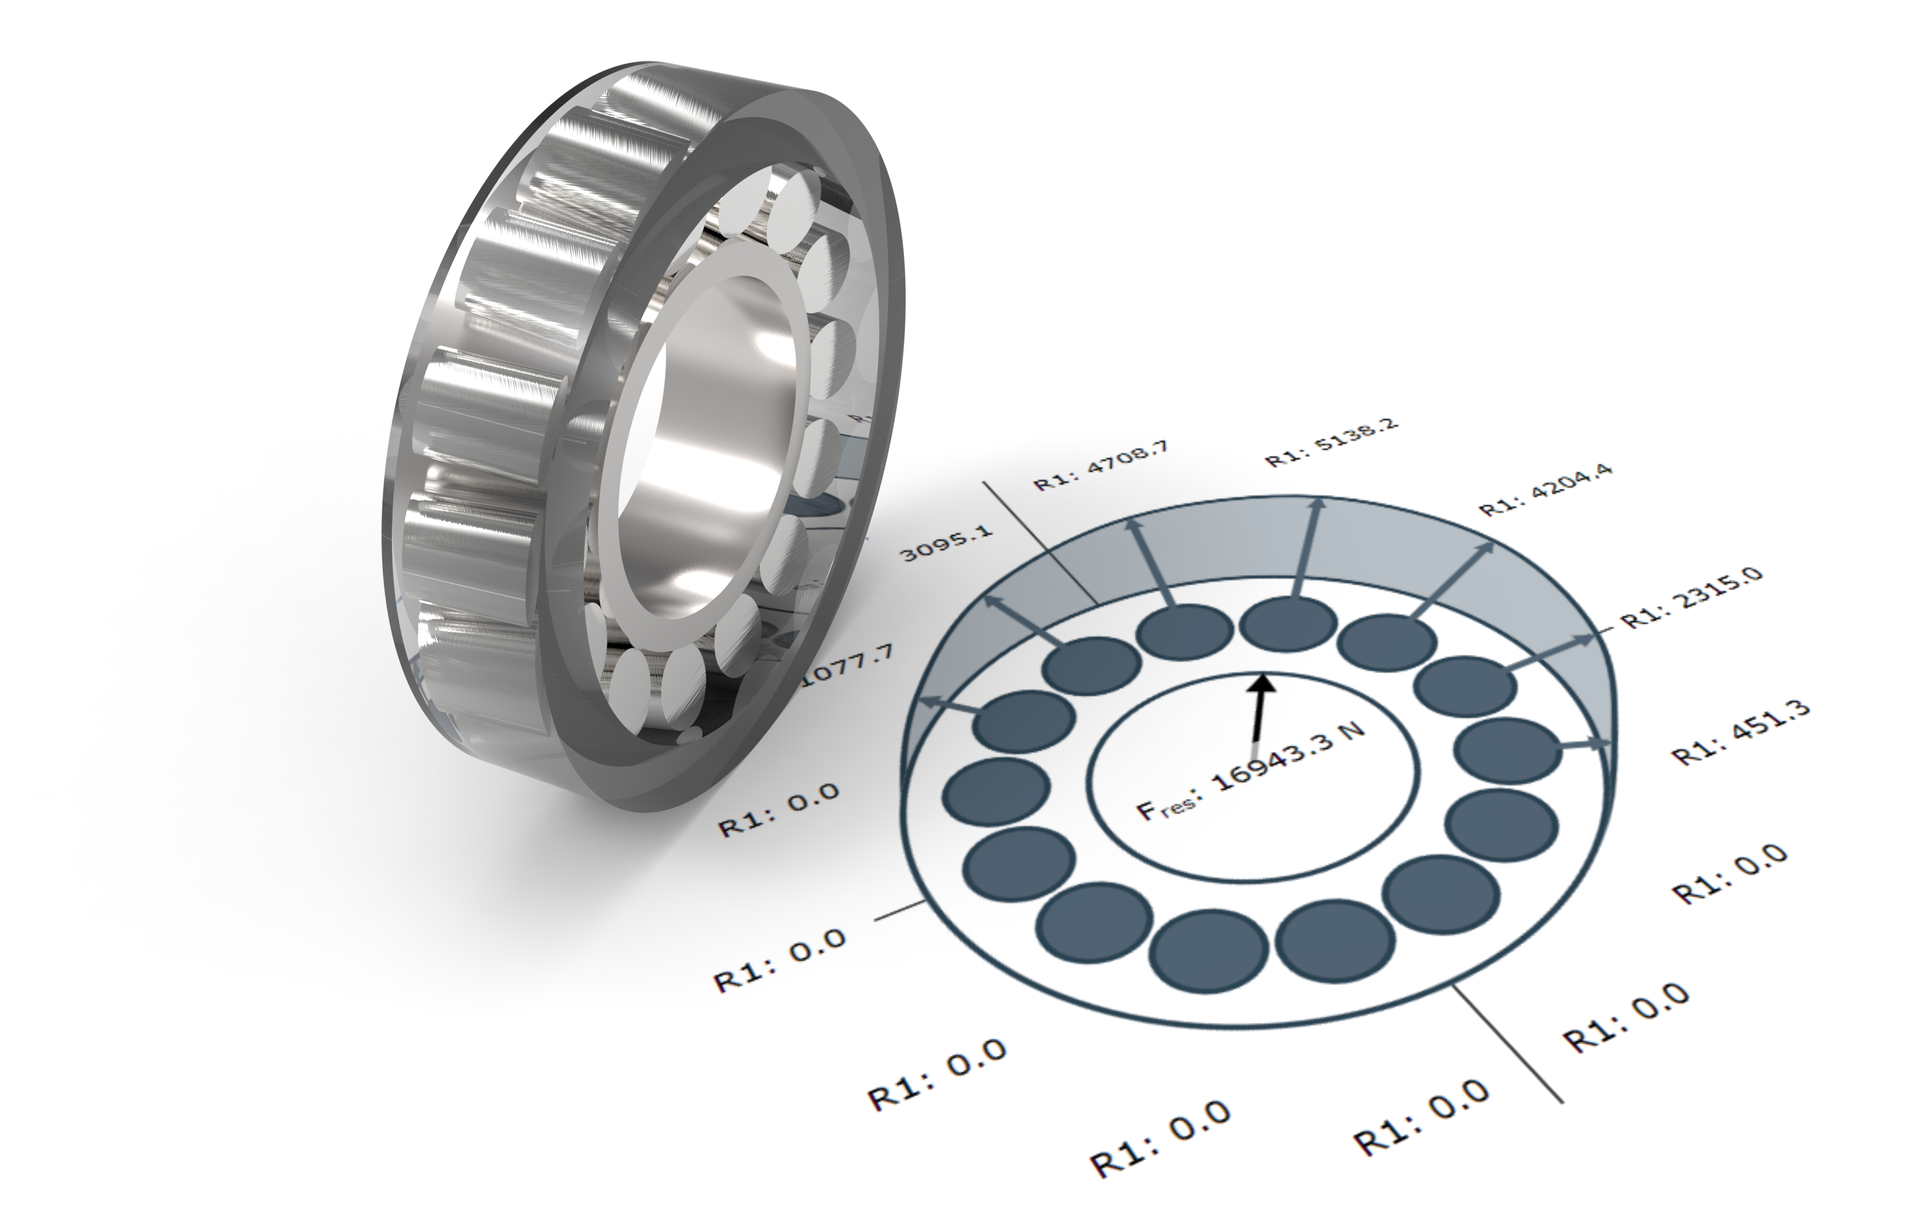 Export of roller bearing calculation results in the FVA-Workbench